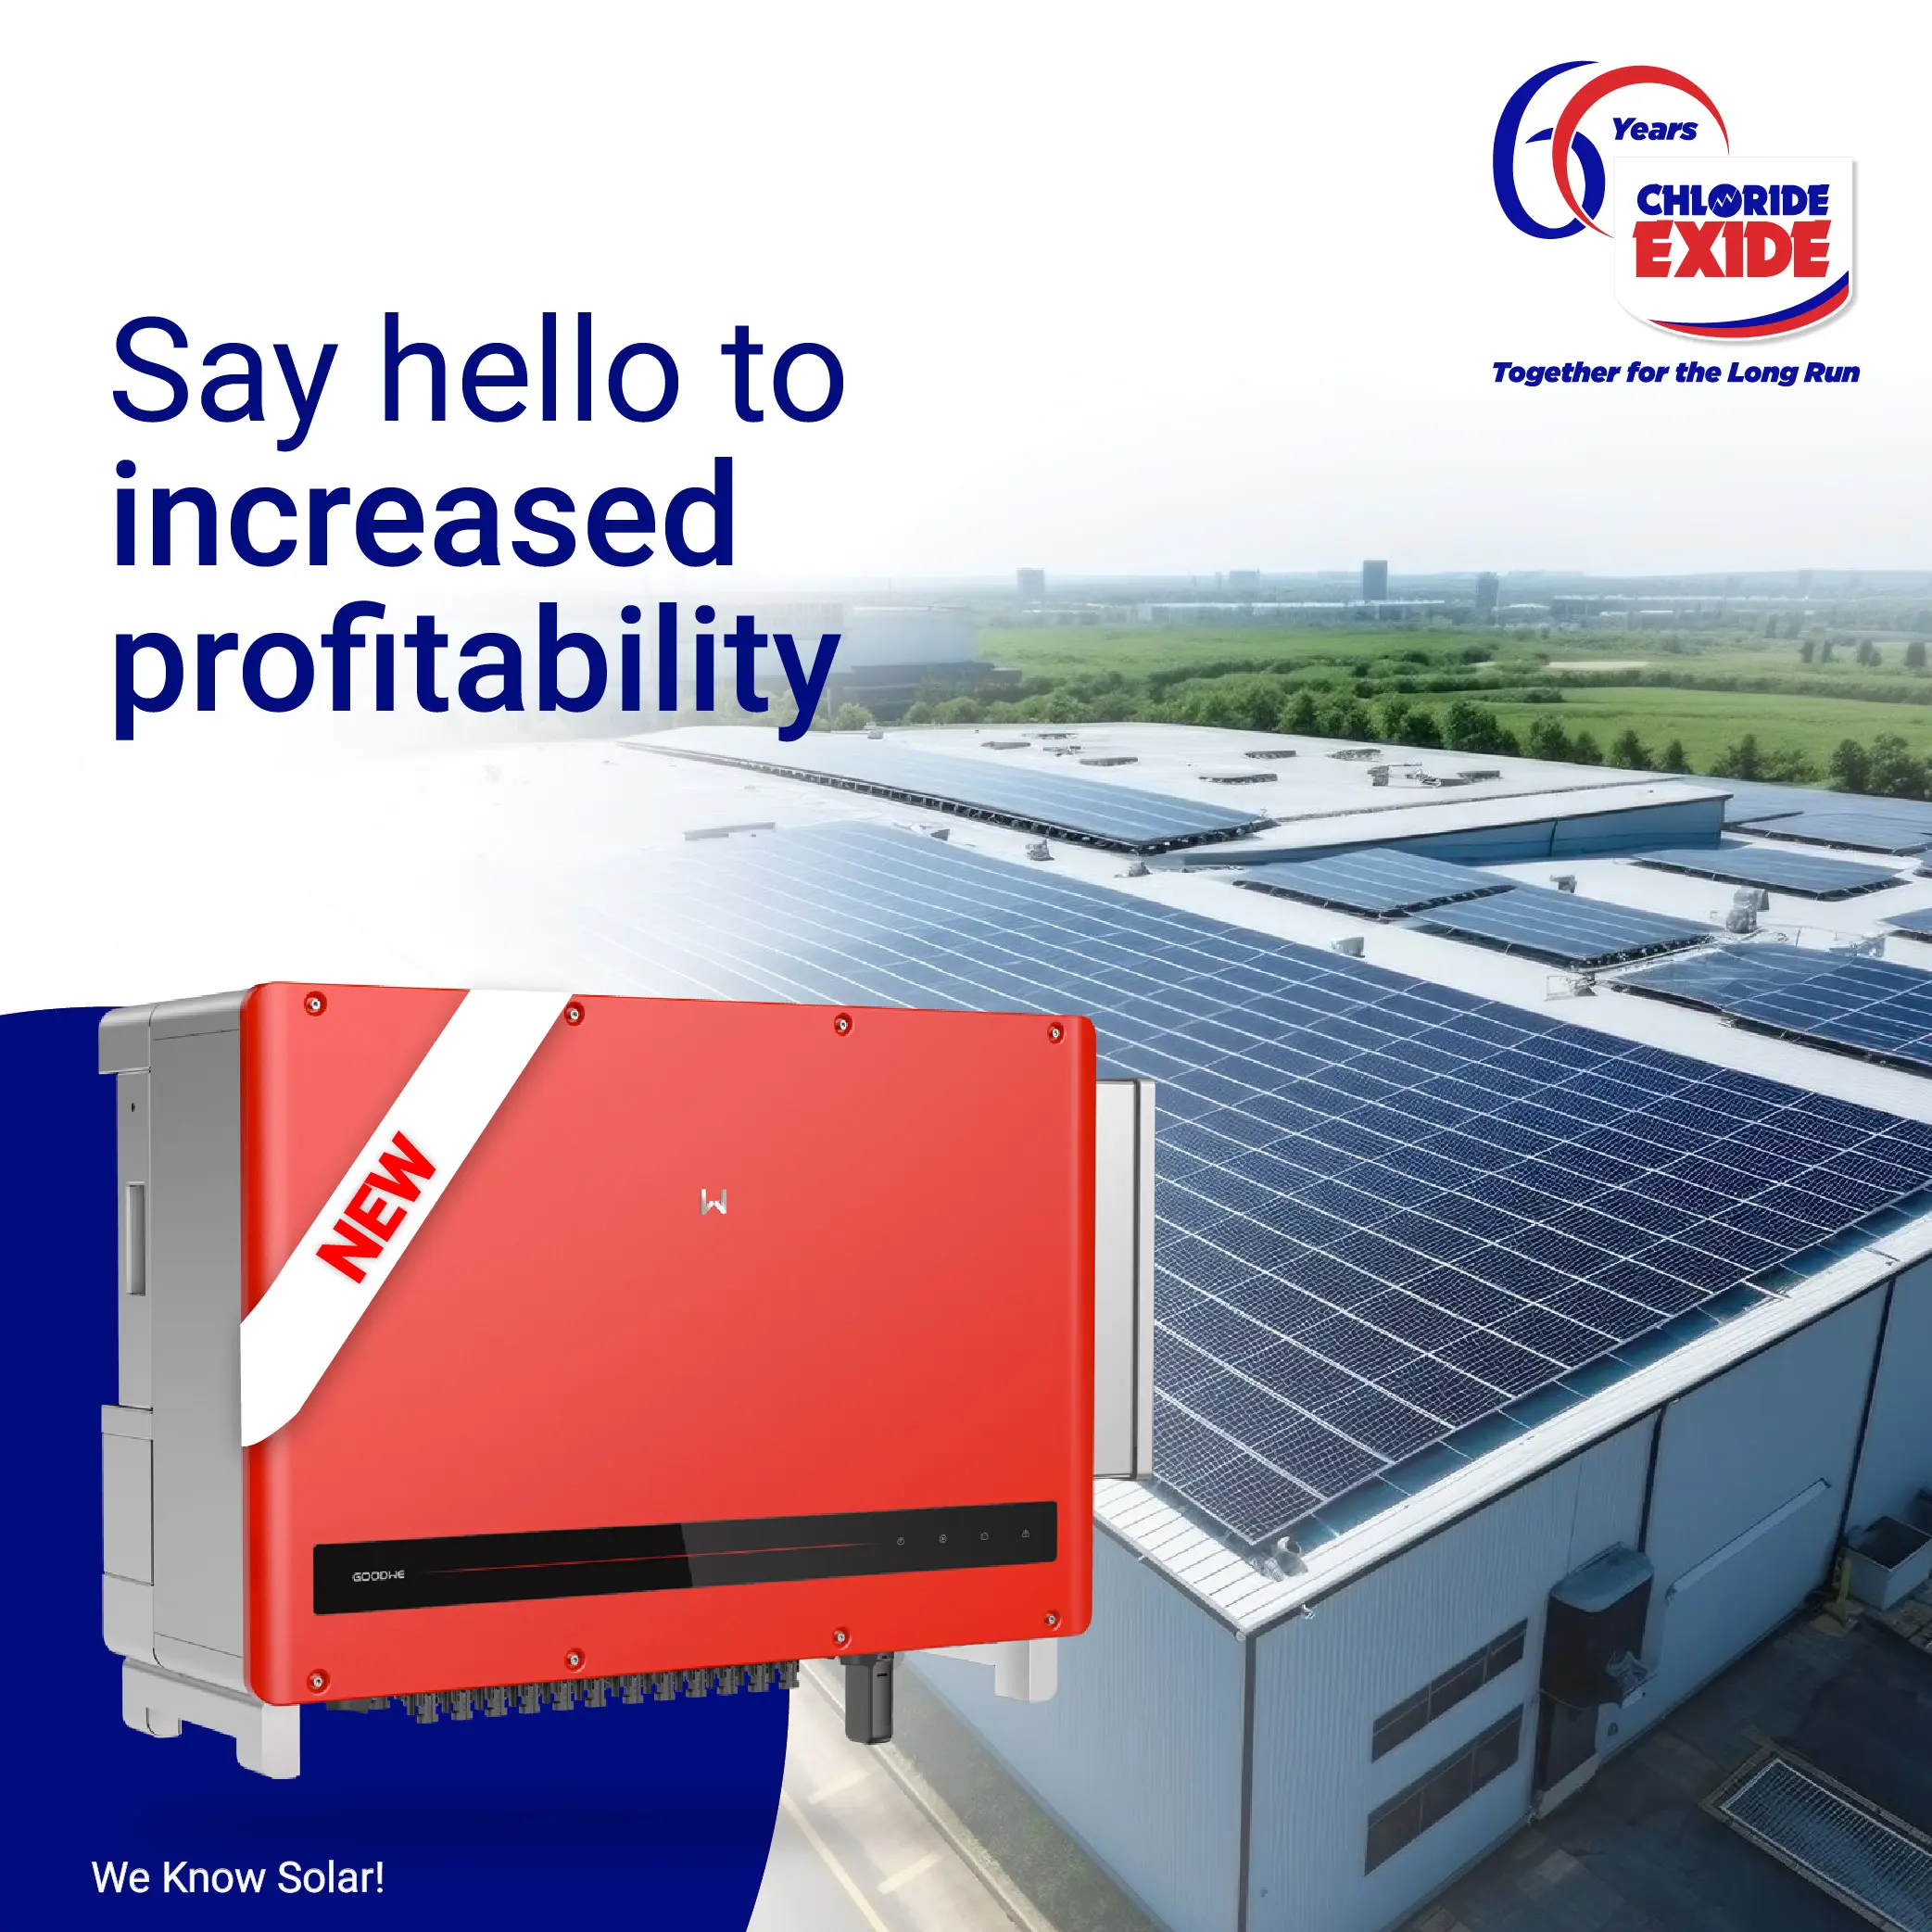 chloride exide solar panels kenya - What is the largest solar project in Kenya